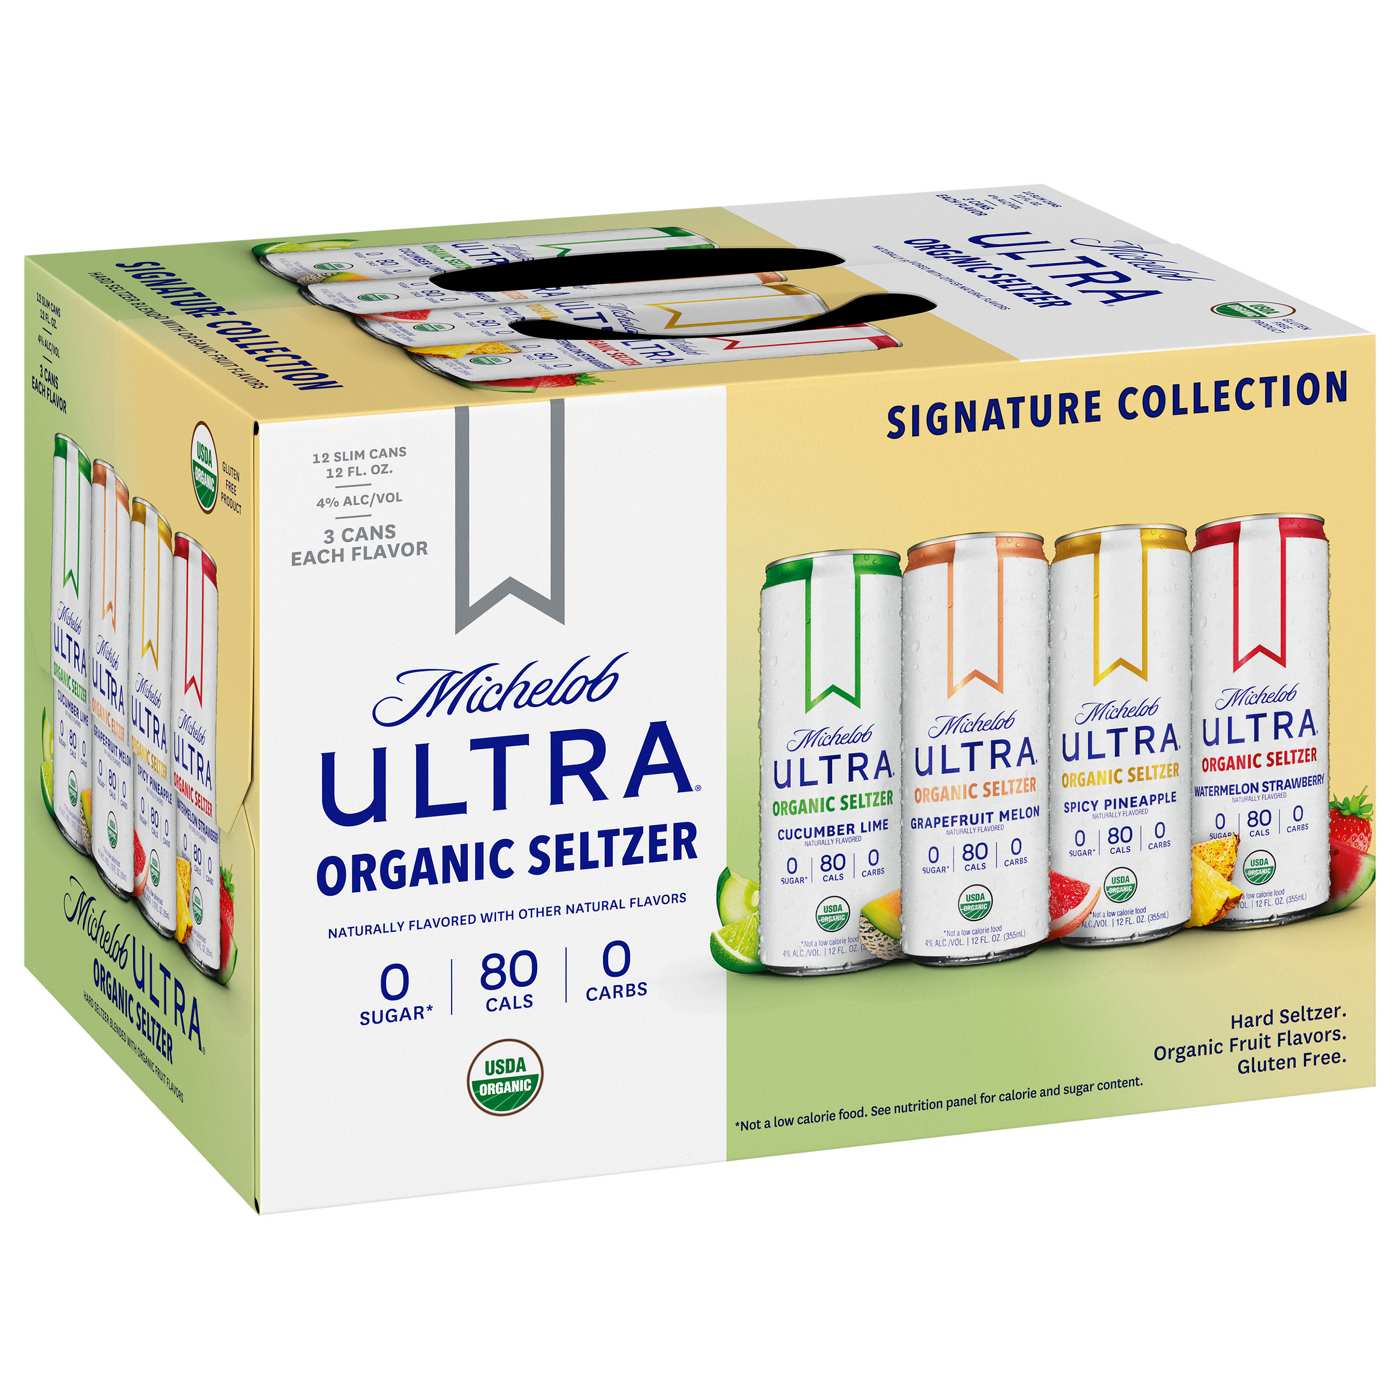 Michelob Ultra Organic Hard Seltzer Variety Pack 12 pk Cans; image 1 of 2